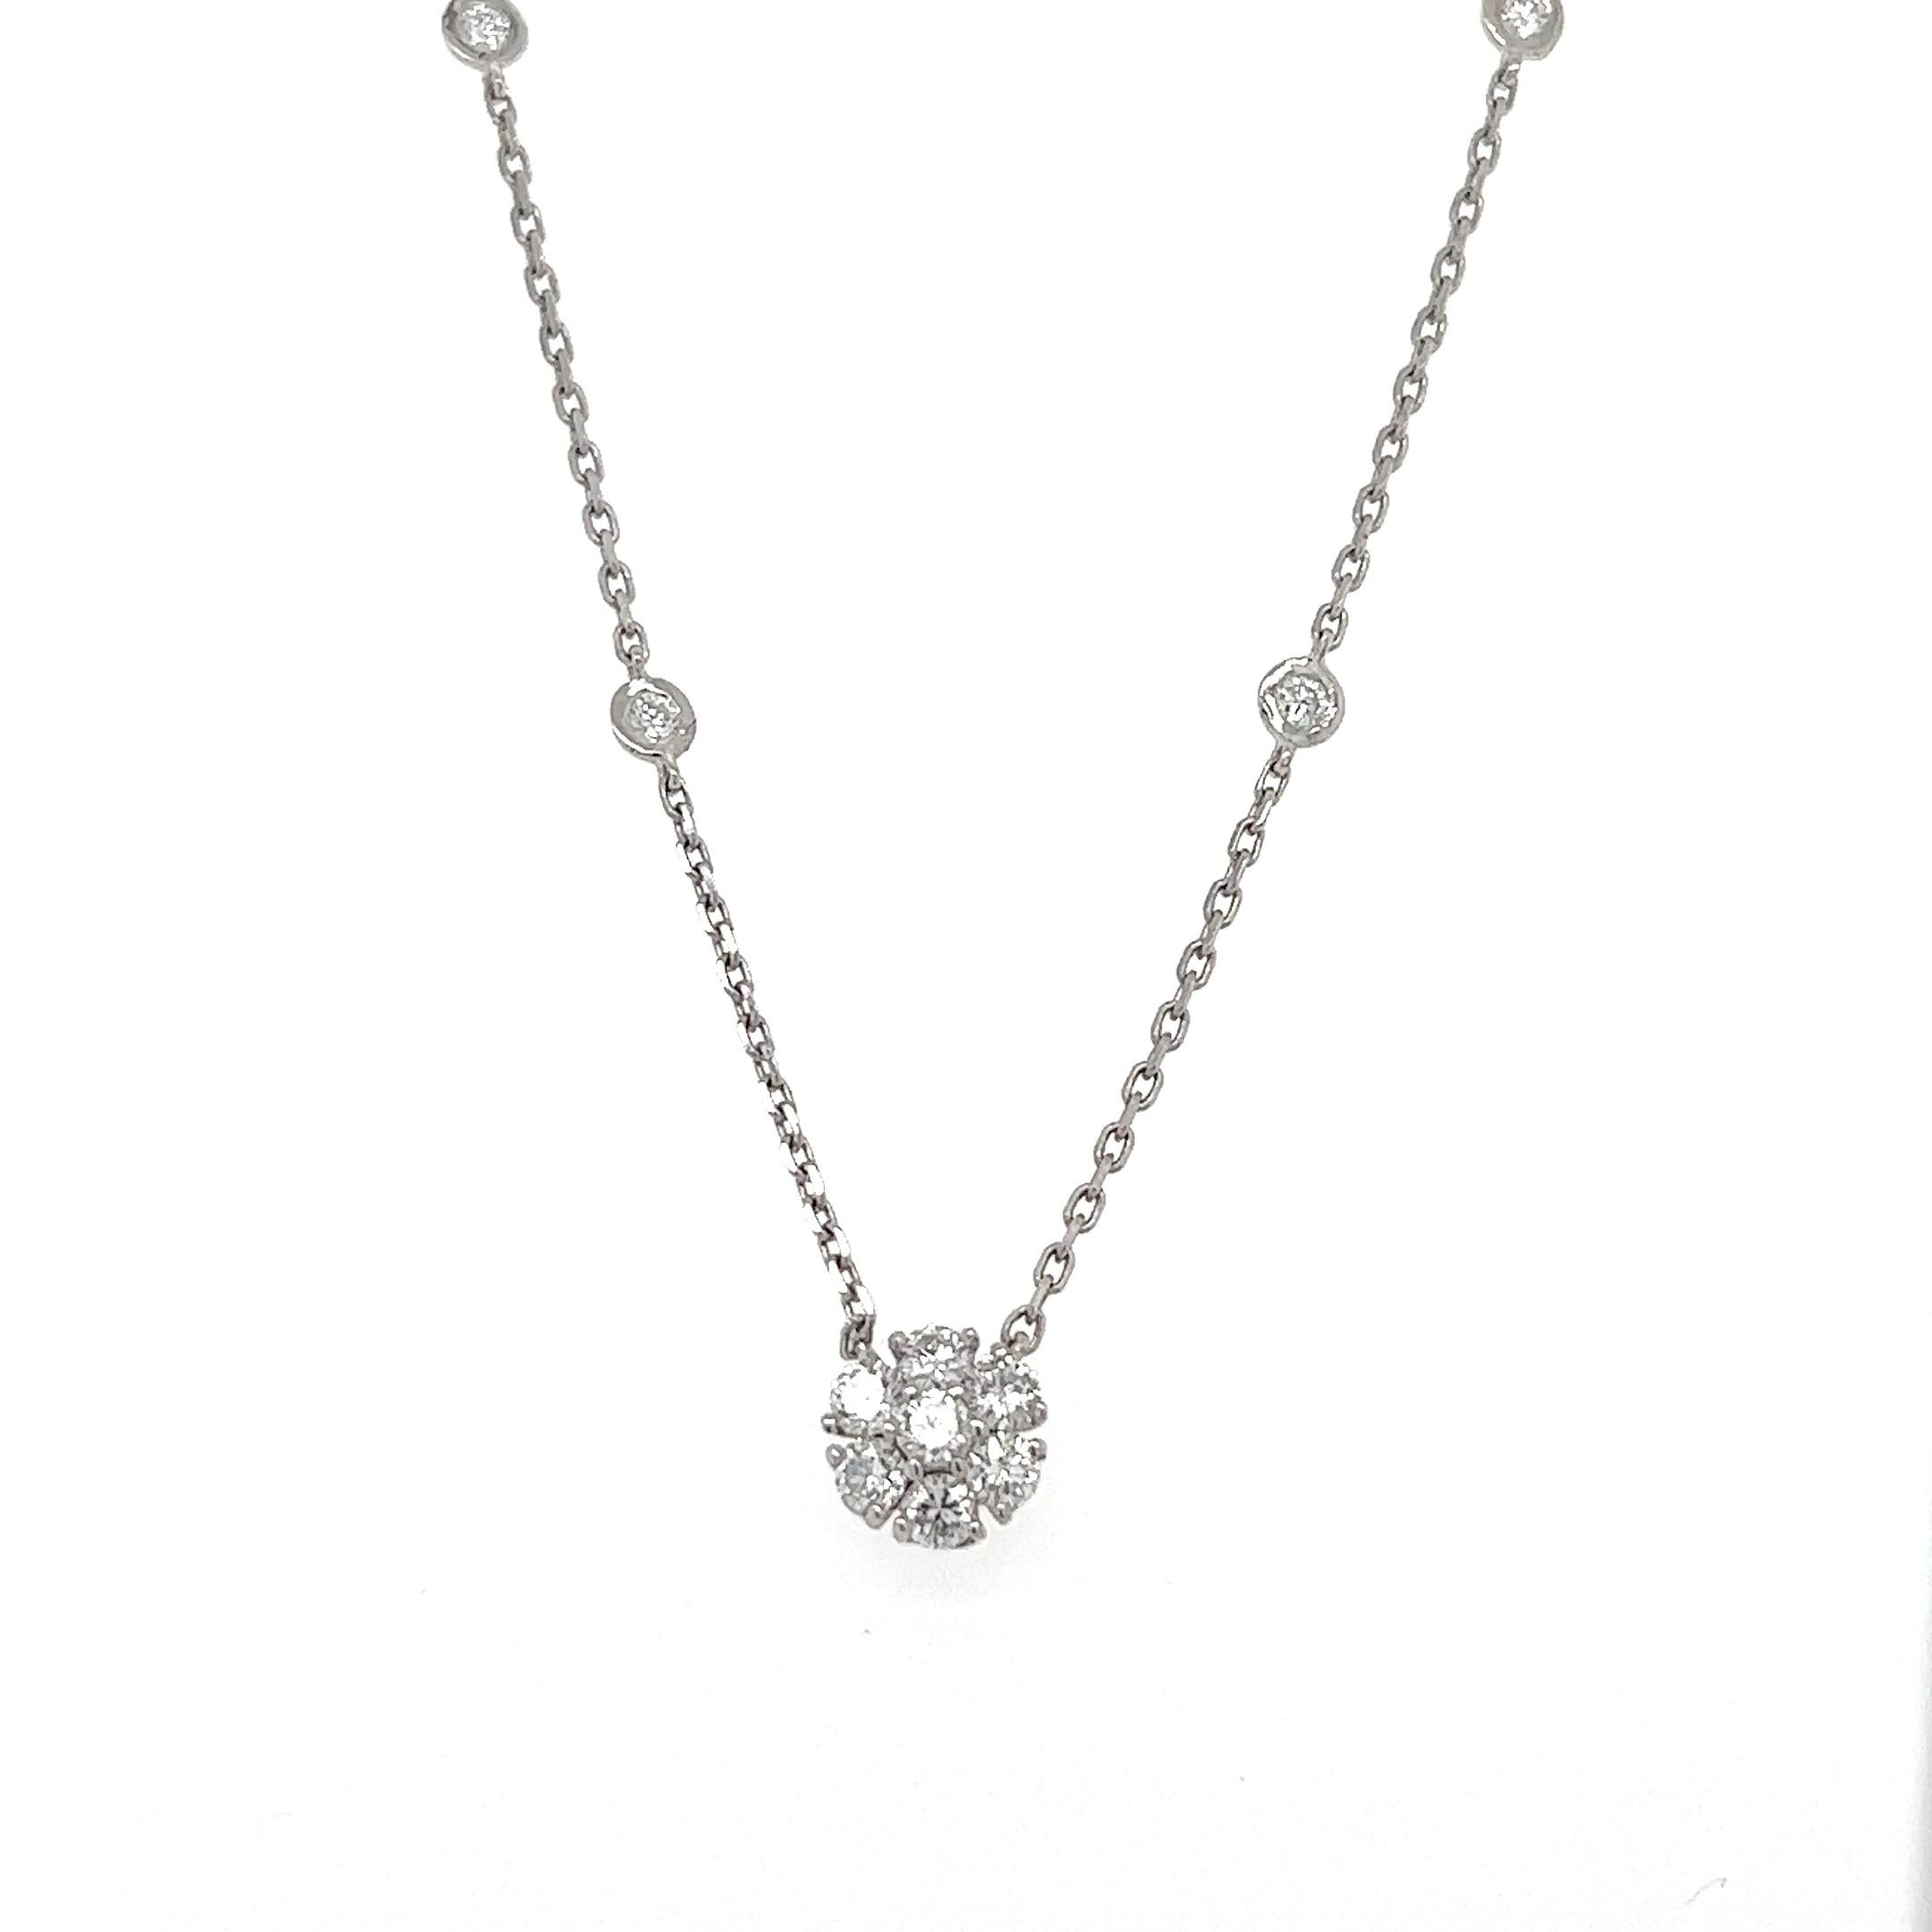 This floret diamond necklace has Natural Round Cut Diamonds that weigh 0.86 carats. The clarity and color of the necklace are VS-F.

The approximate weight of this necklace is 2.7 grams. 

The necklace is 16 inches long and the chain has diamonds